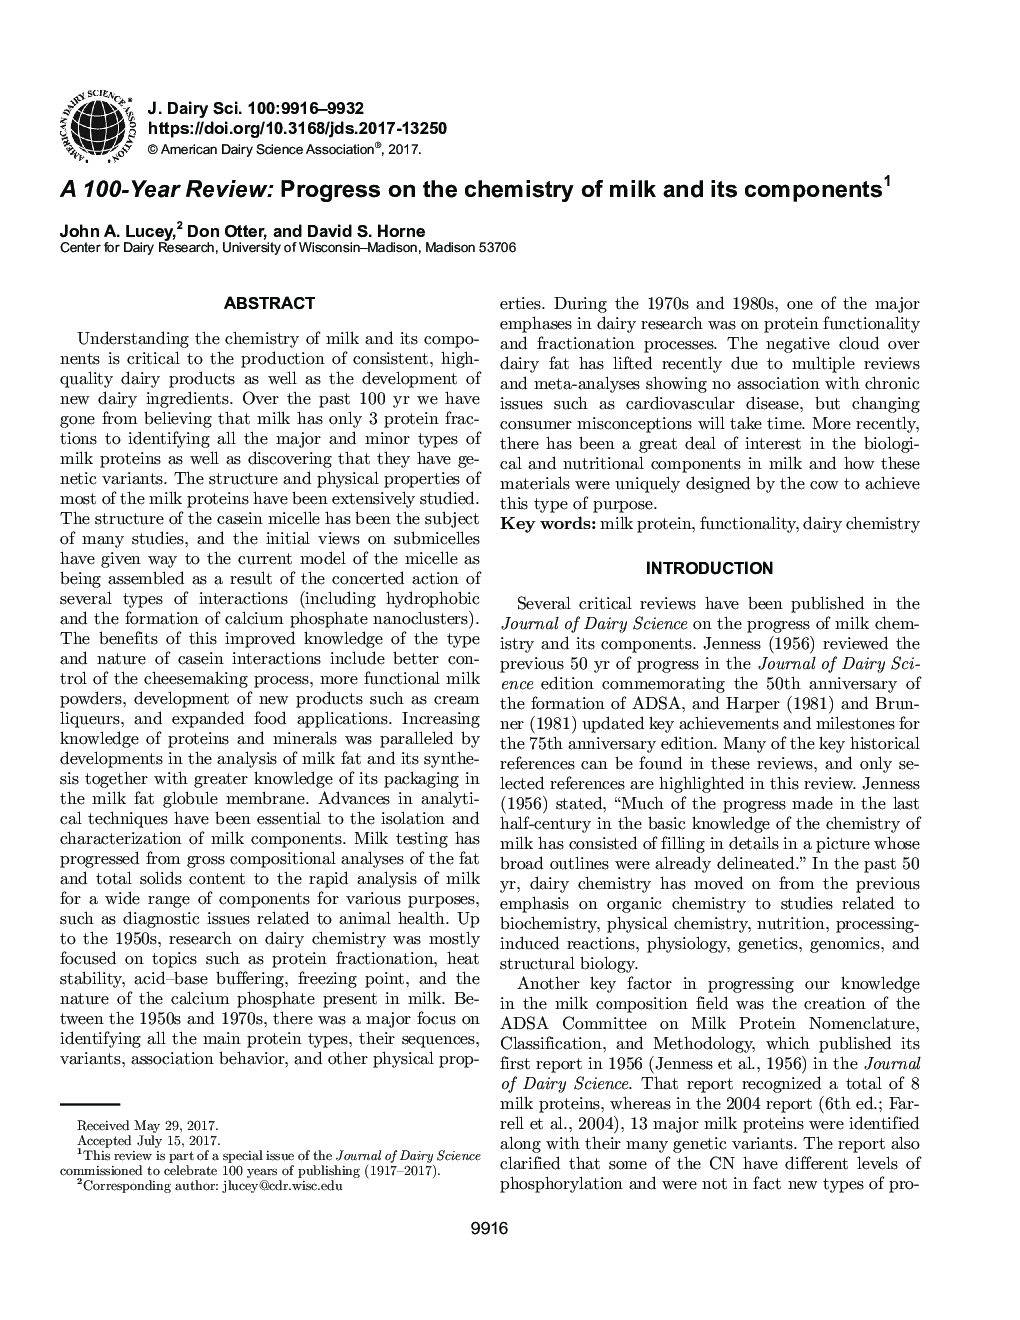 A 100-Year Review: Progress on the chemistry of milk and its components